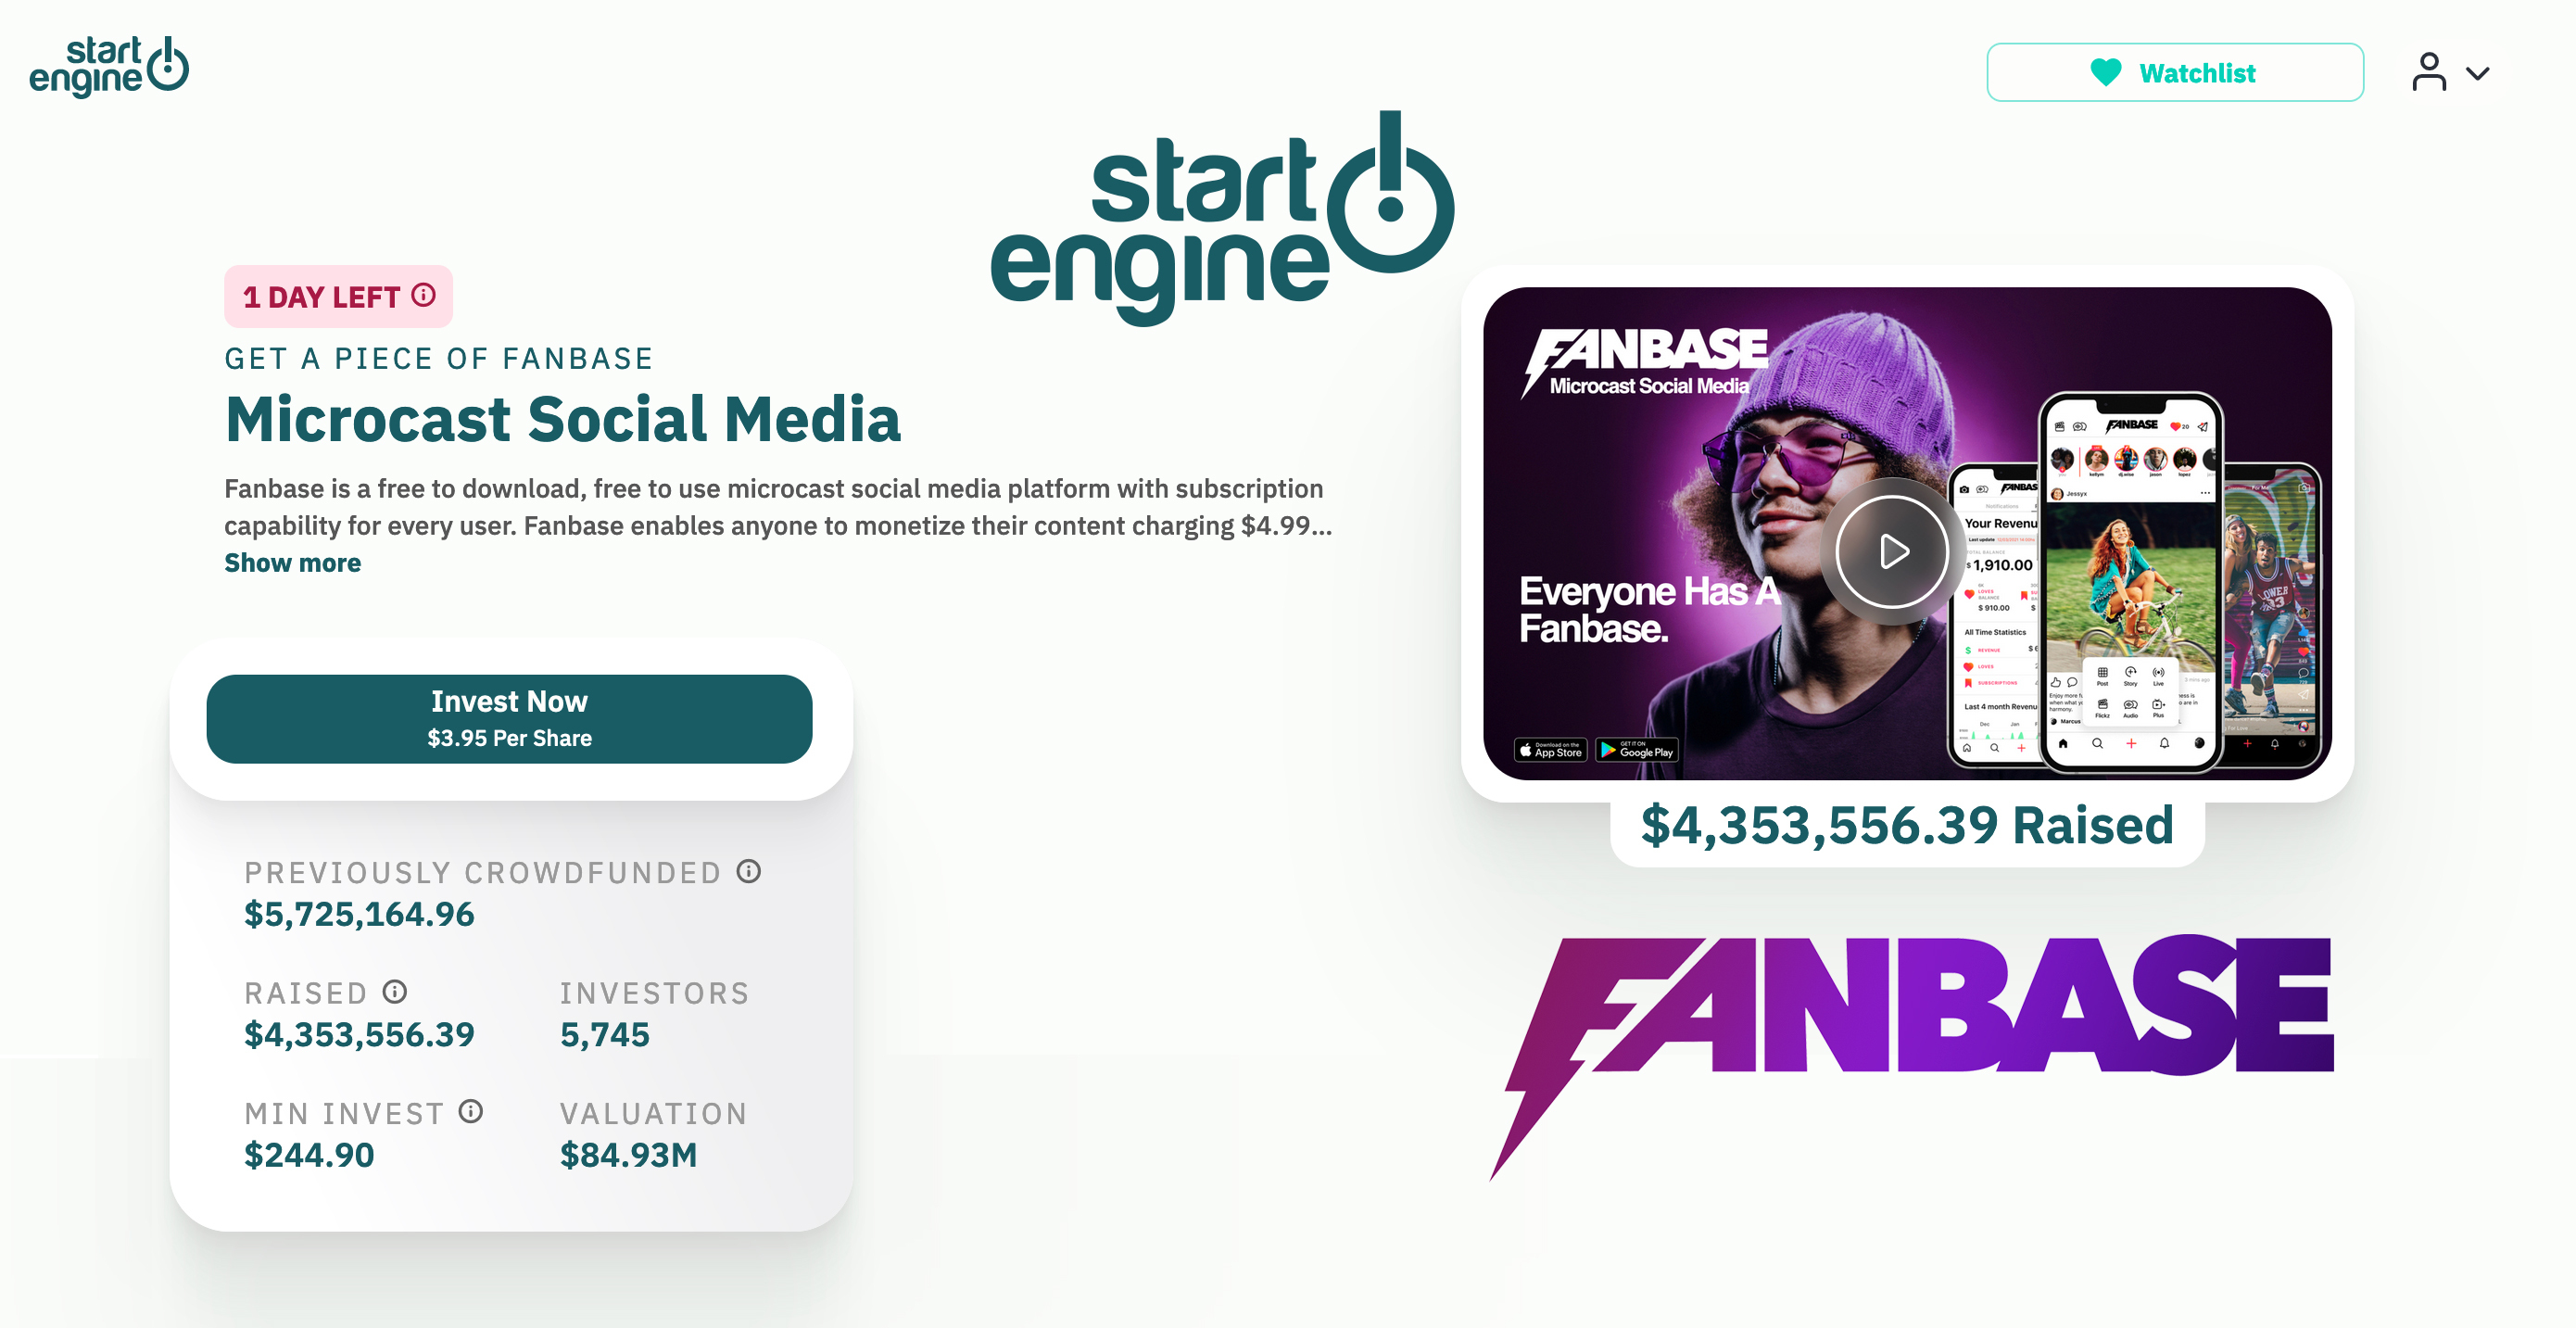 Last Day to Invest in Fanbase Seed Round on StartEngine